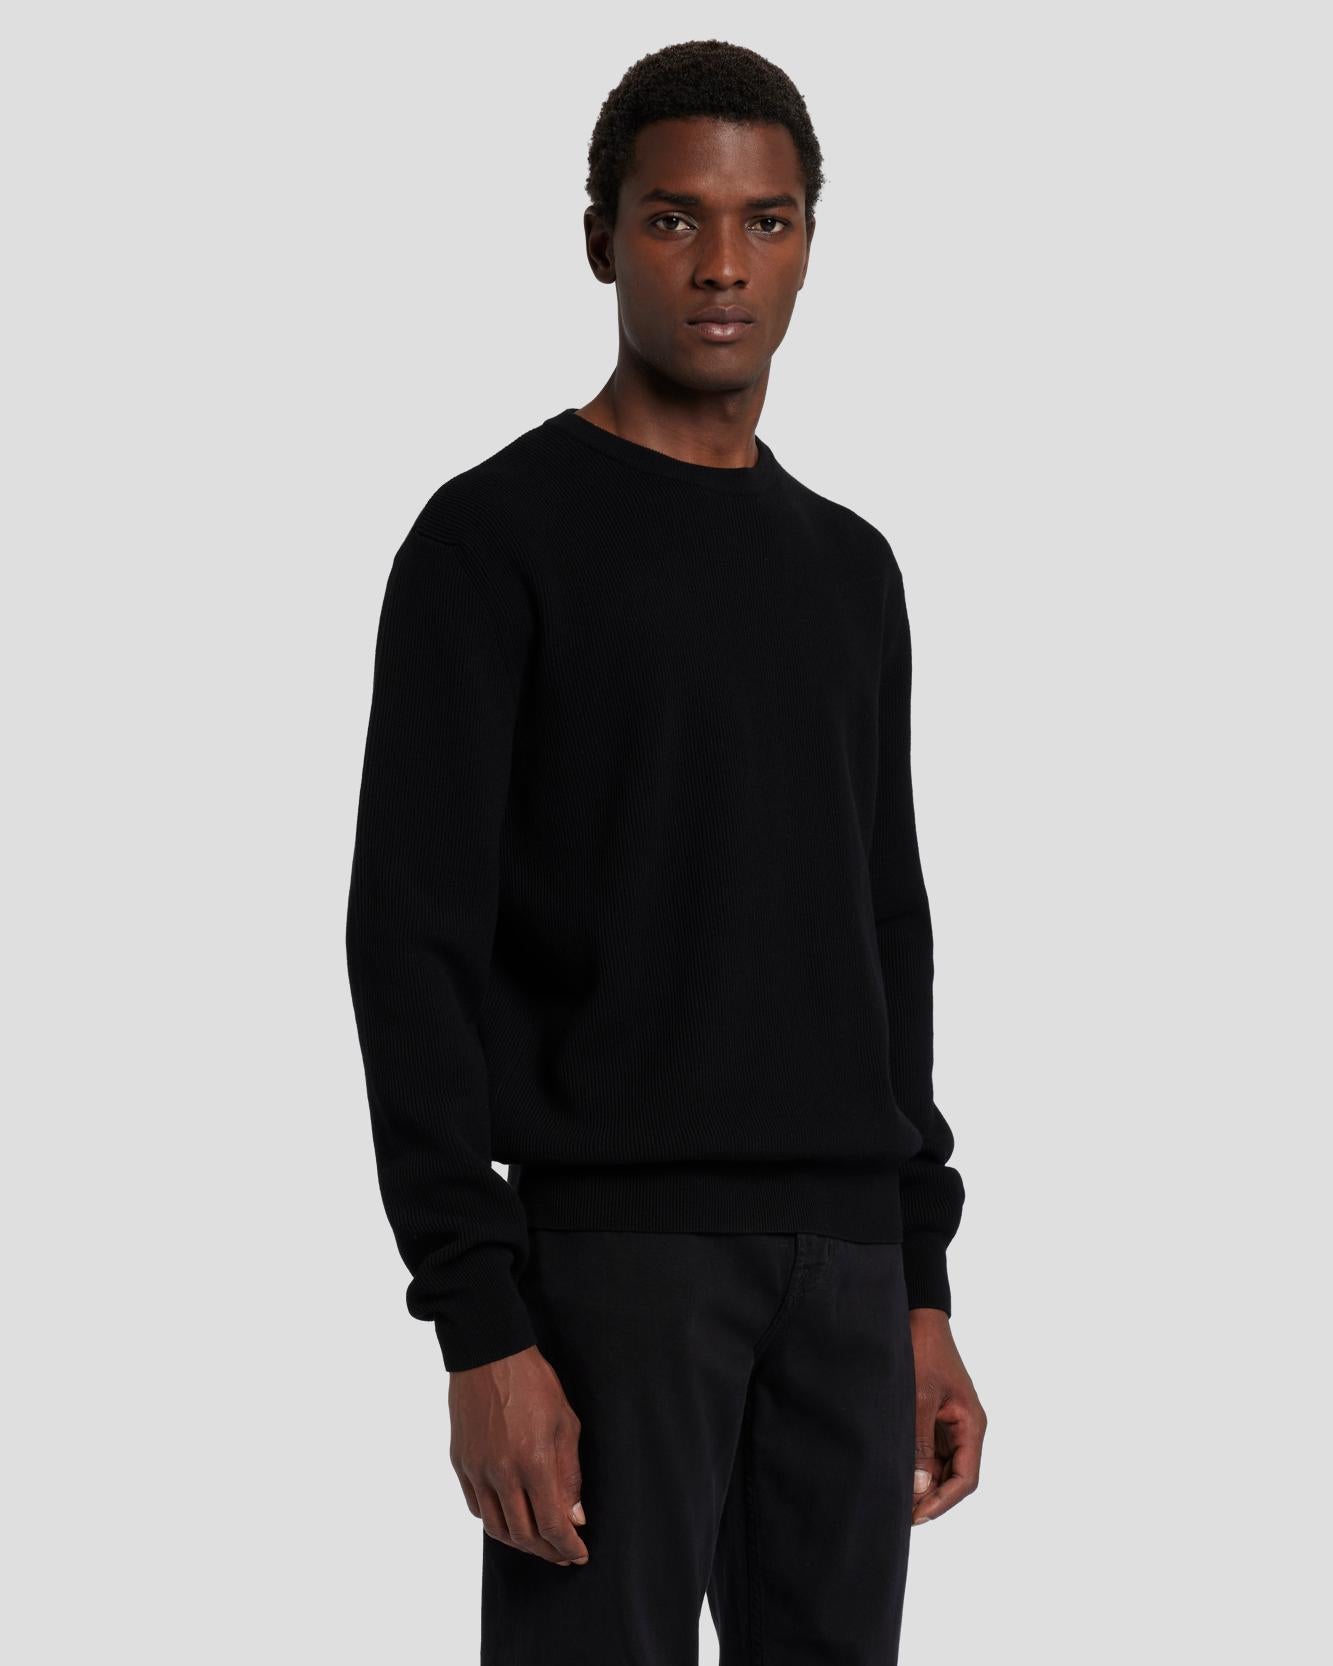 Luxe Performance Plus Sweater in Black | 7 For All Mankind